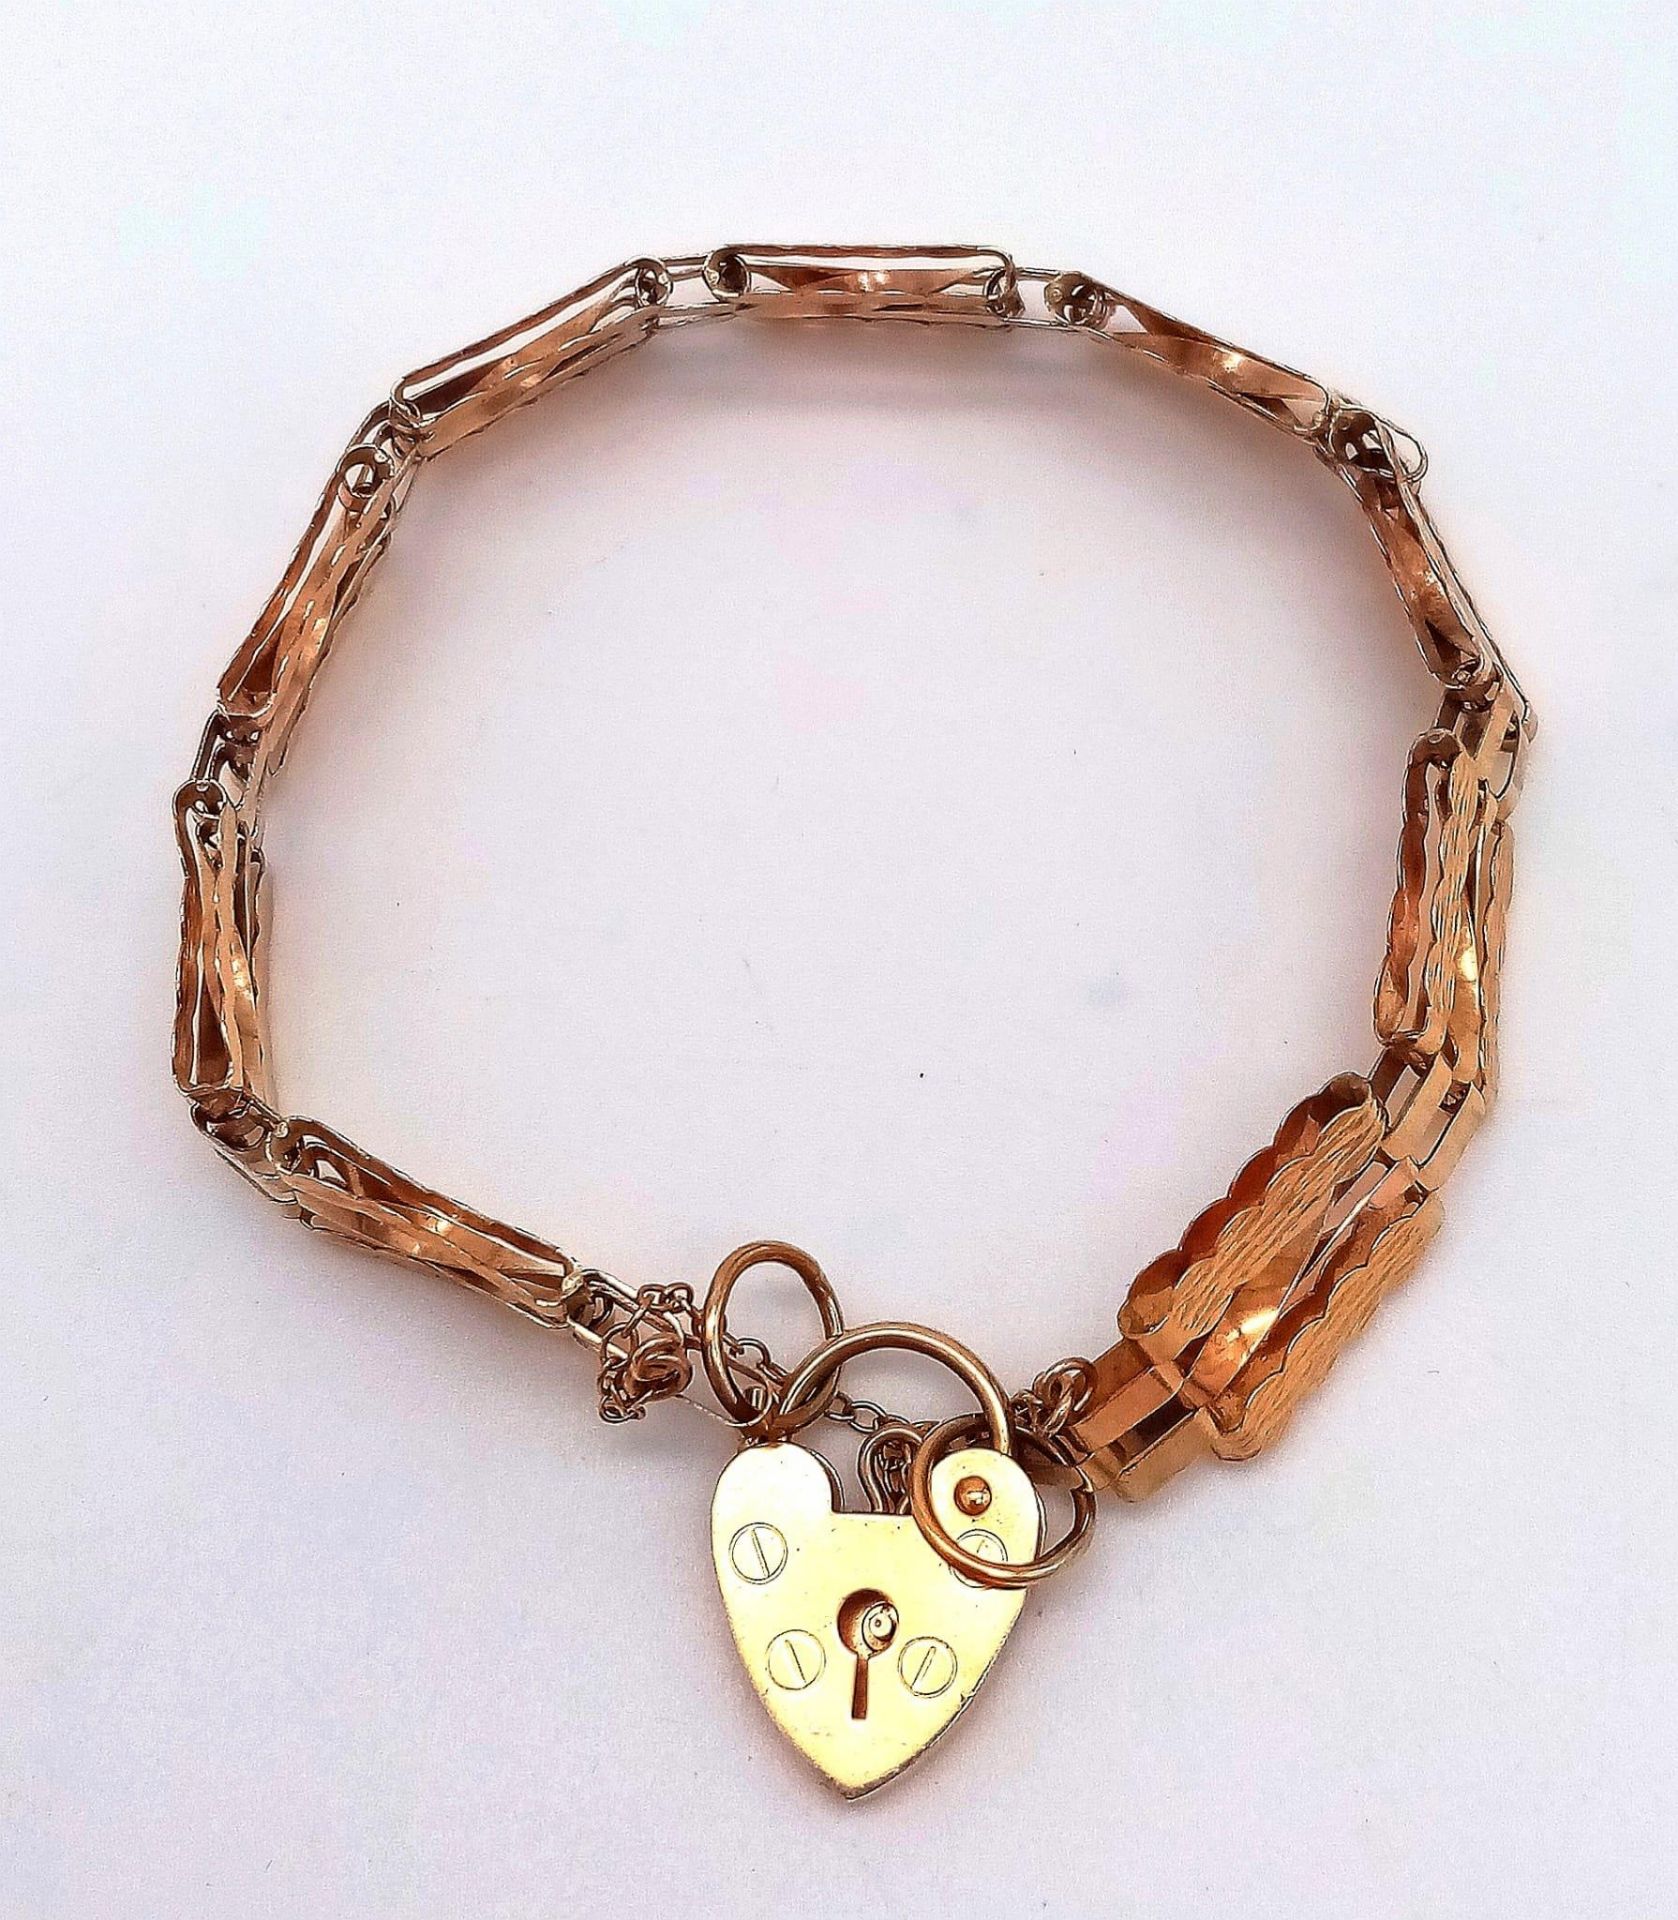 AN ANTIQUE 9K GOLD NICELY PATTERNED GATE BRACELET WITH HEART PADLOCK AND SAFETY CHAIN . 8.1gms - Image 7 of 9